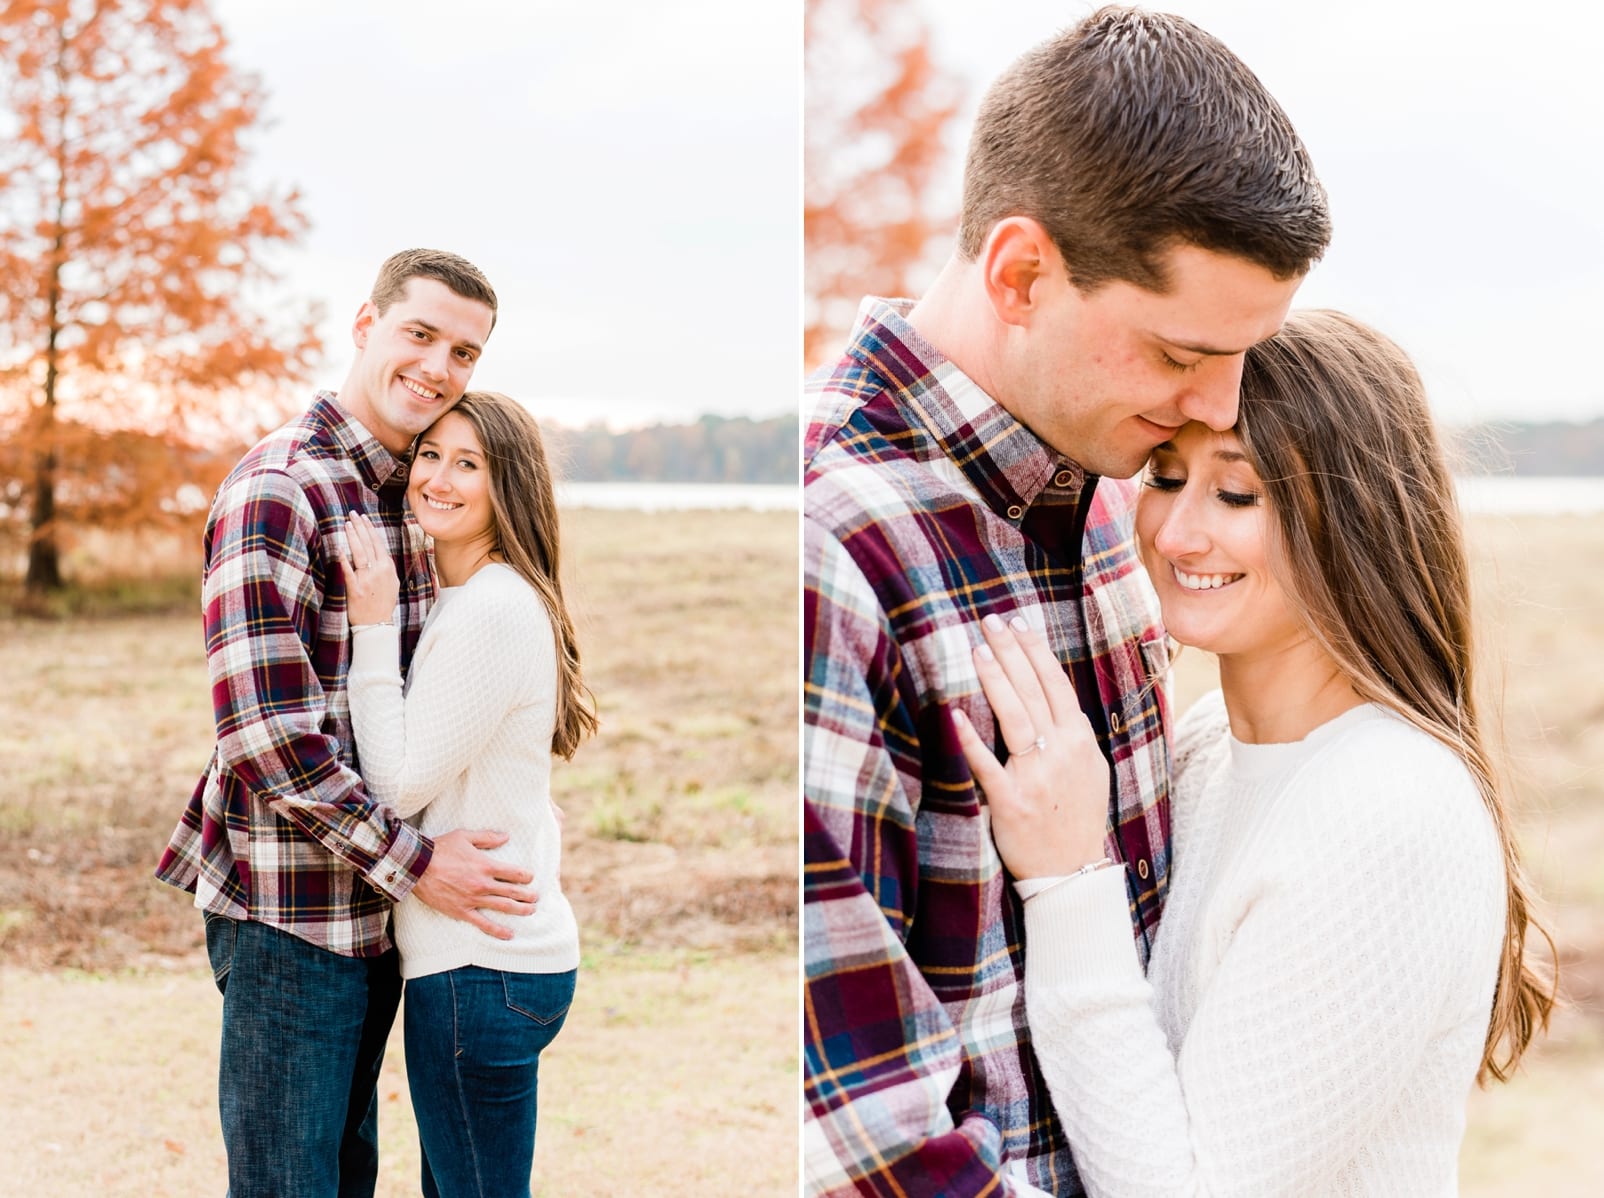 Raleigh couple with him in a plaid shirt and her in a cream sweater photo